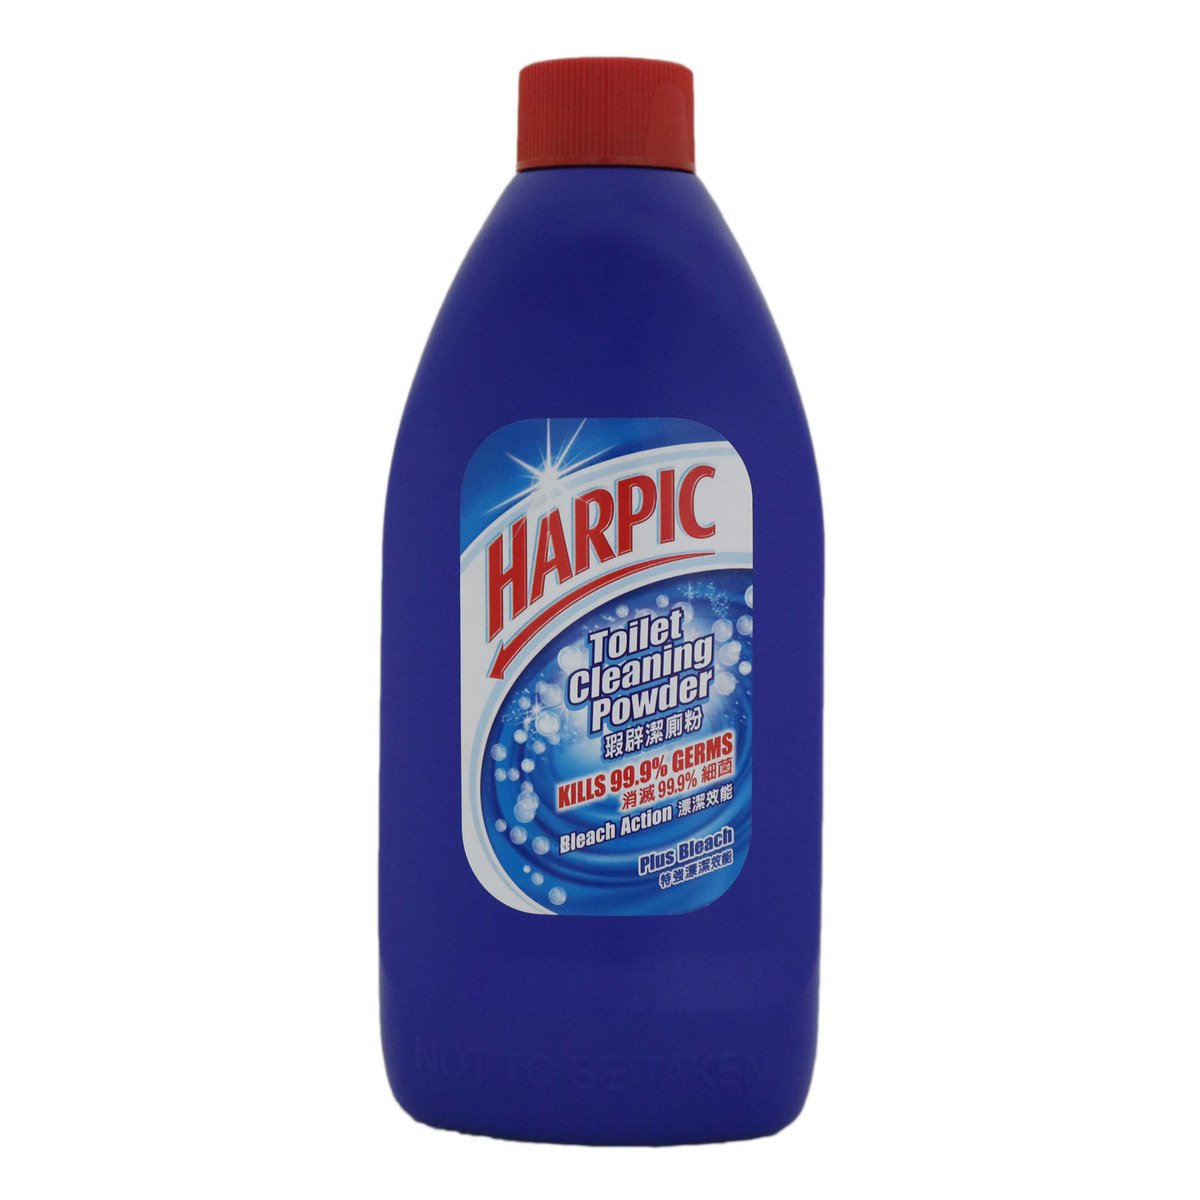 Harpic Toilet Cleaning Powder 900g